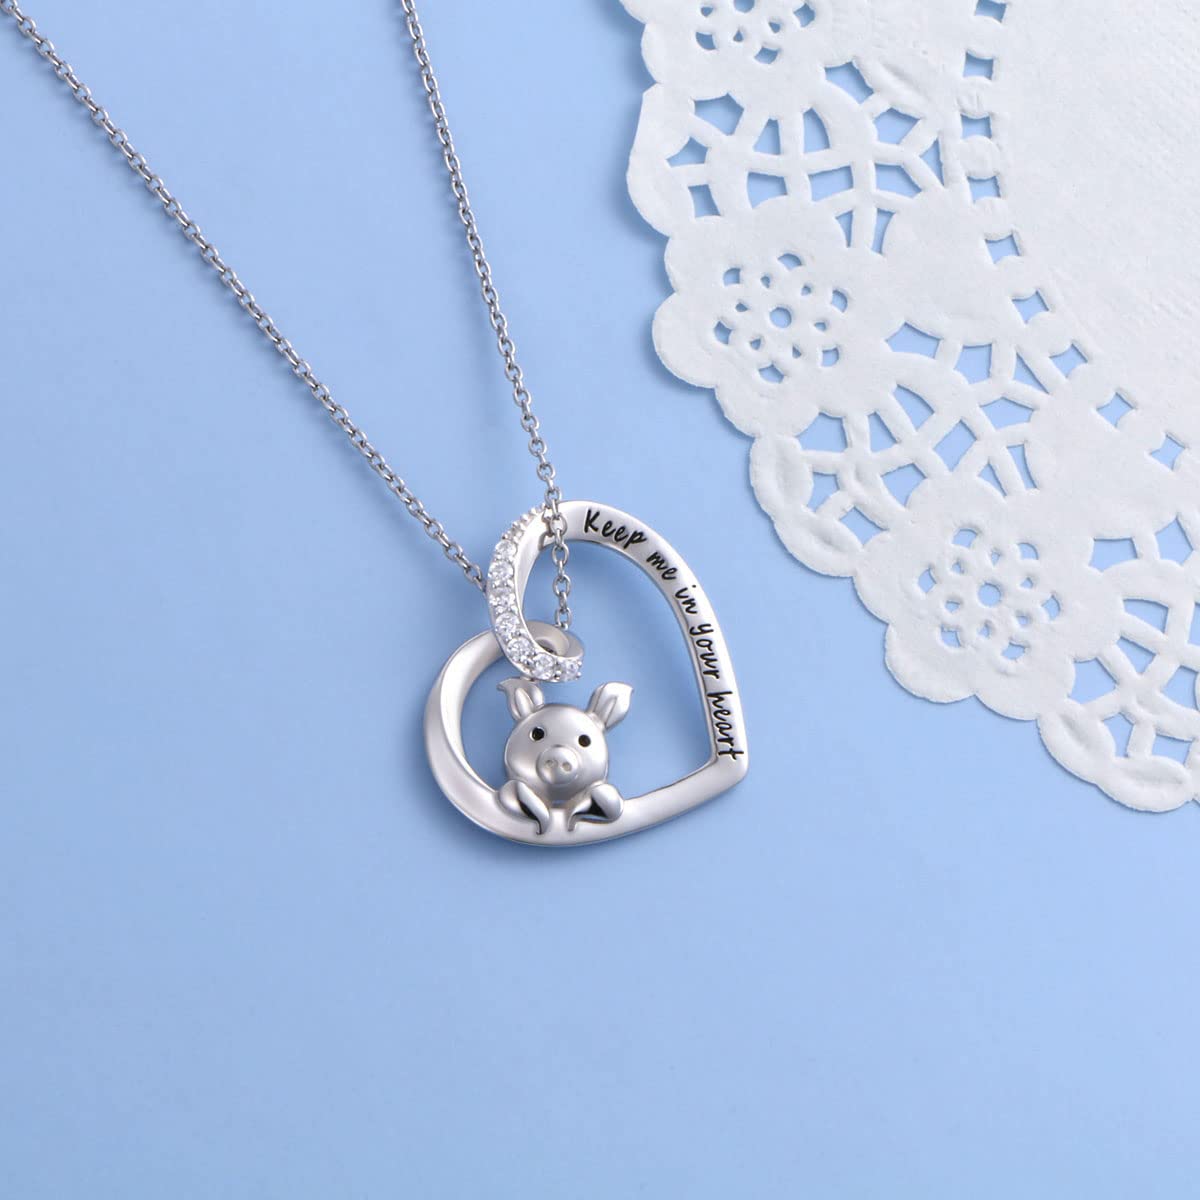 FLYOW 925 Sterling Silver Cubic Zirconia Engraved Keep Me in Your Heart Cute Pig Heart Pendant Necklace for Women Teen Girls Birthday Valentine's Day Gifts, 18 inch